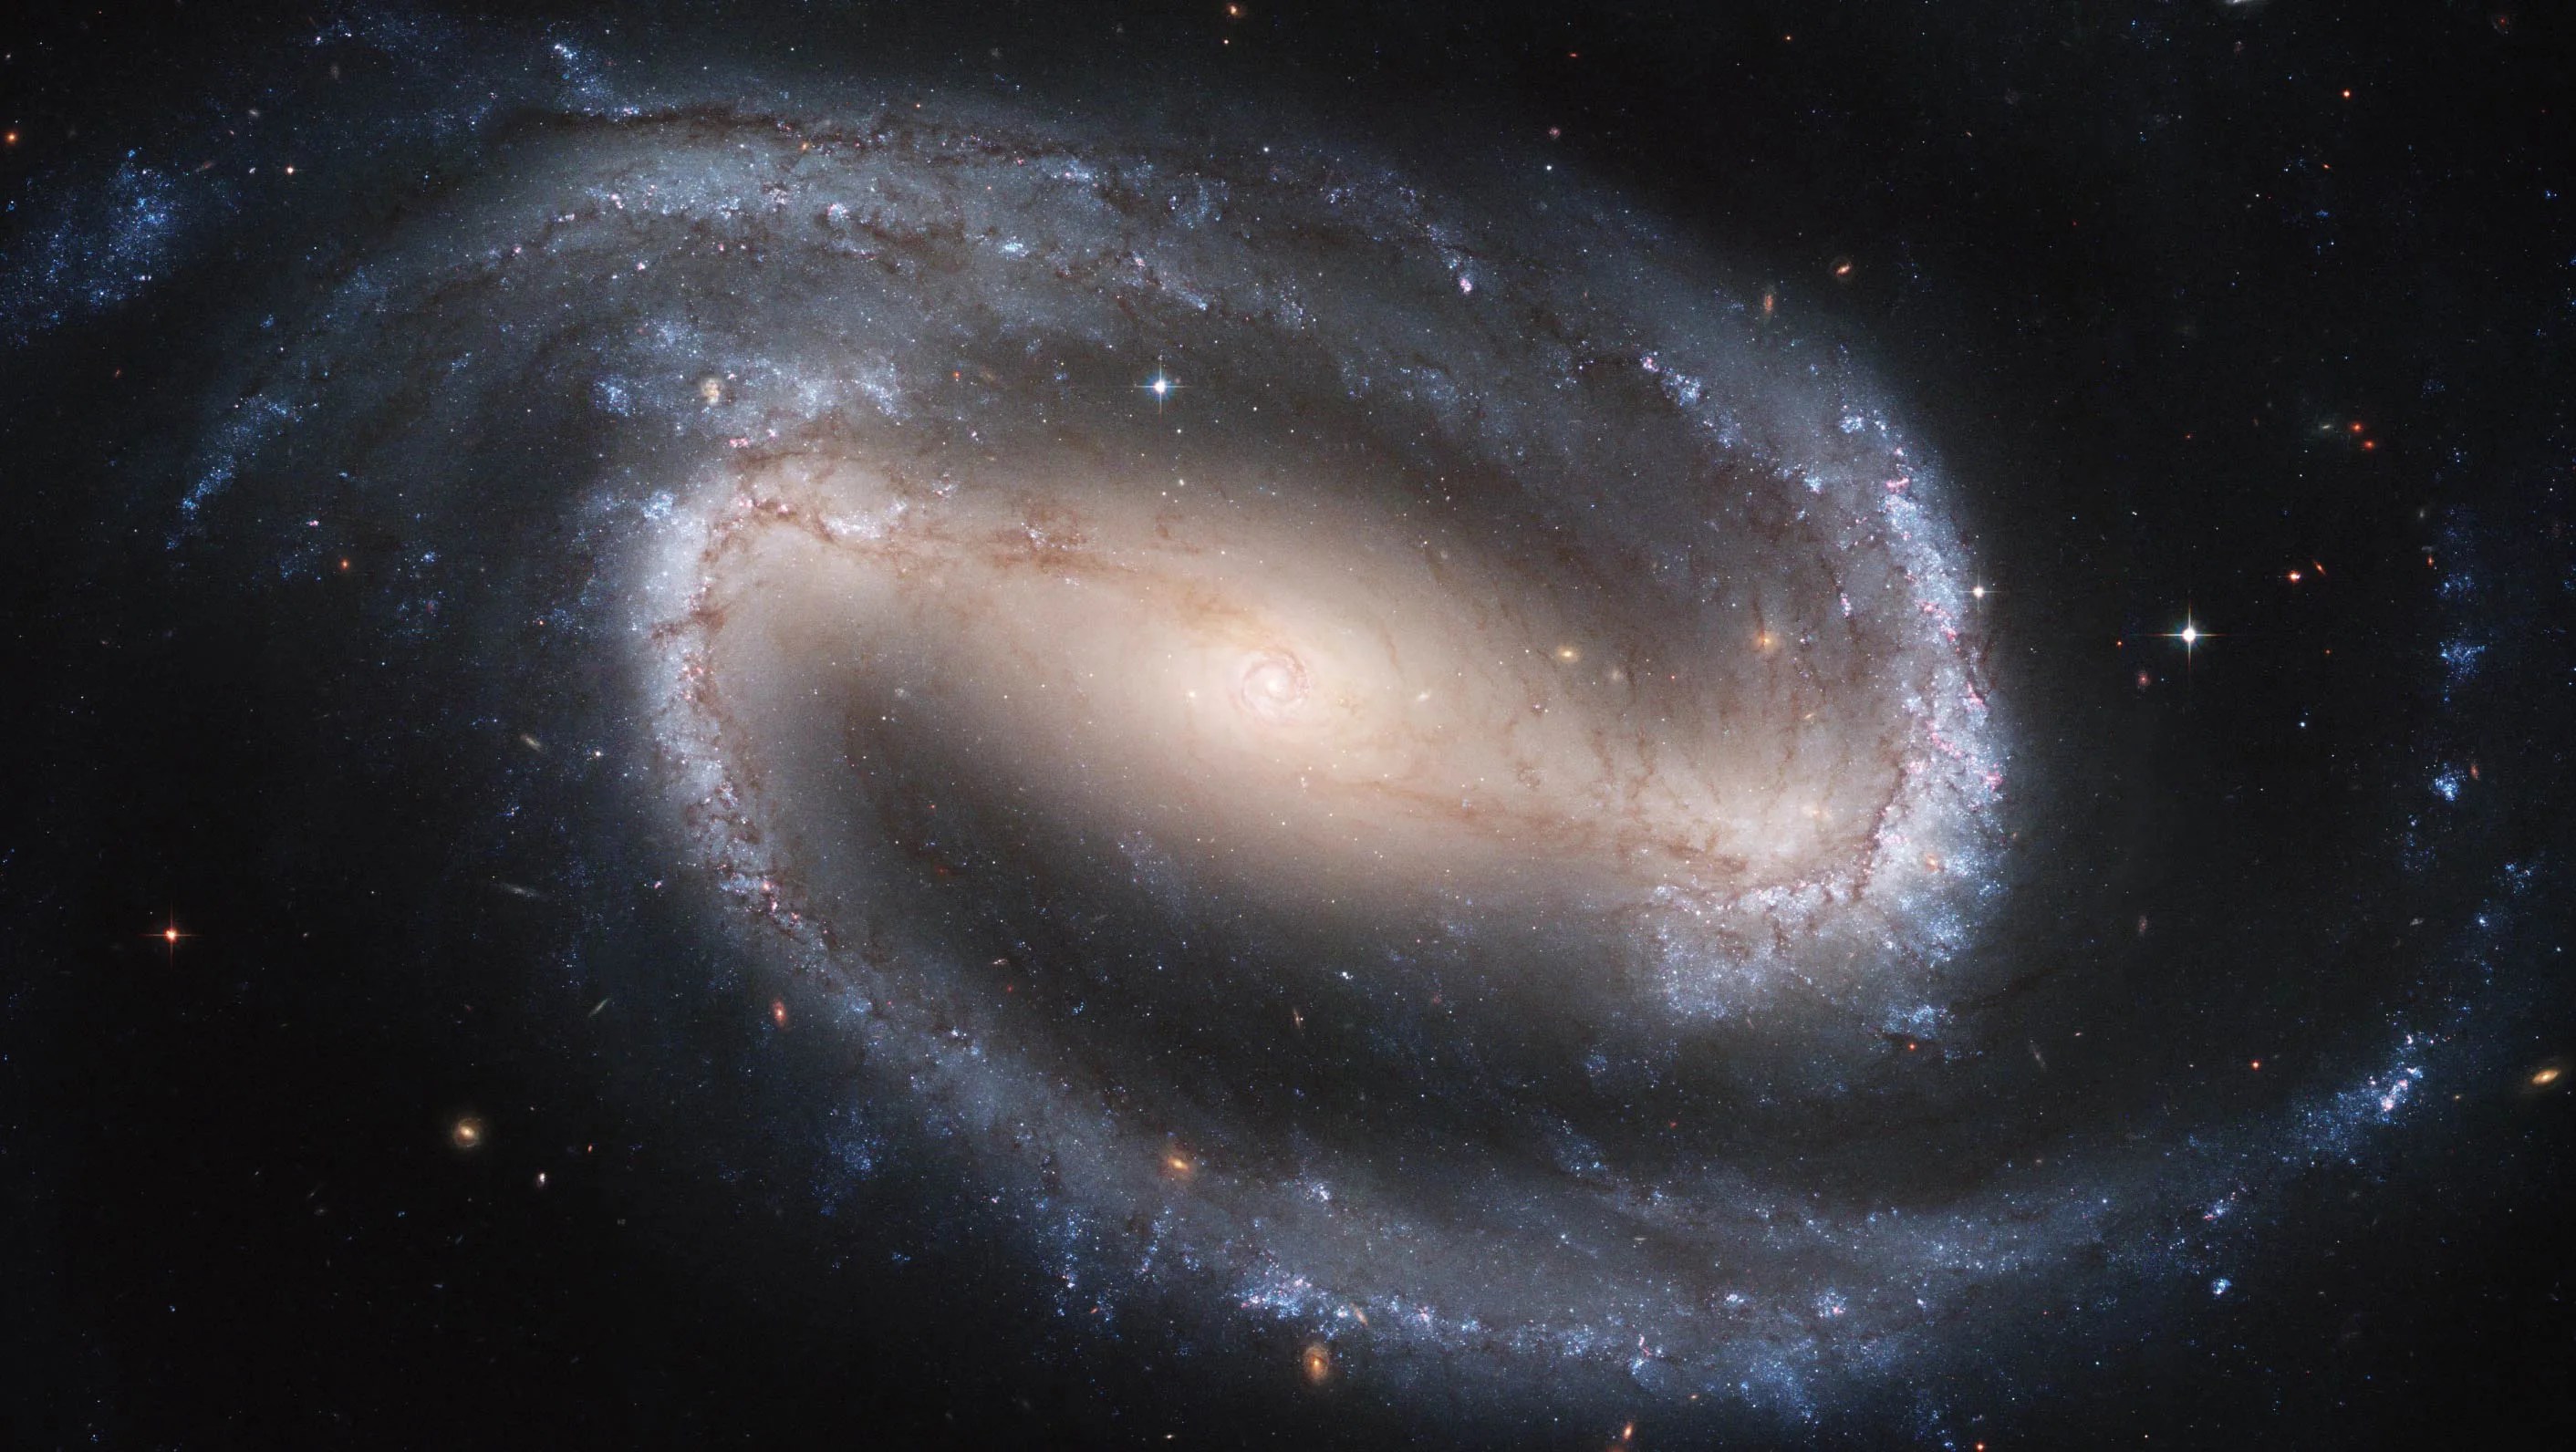 Image center holds the an oval of stars that mark the galaxy's center. Arms extend toward the upper-left and lower right of the central bulge of stars. Extending beyond the ends of each of these arms is are long curving tails that swirl above and below the galaxy.